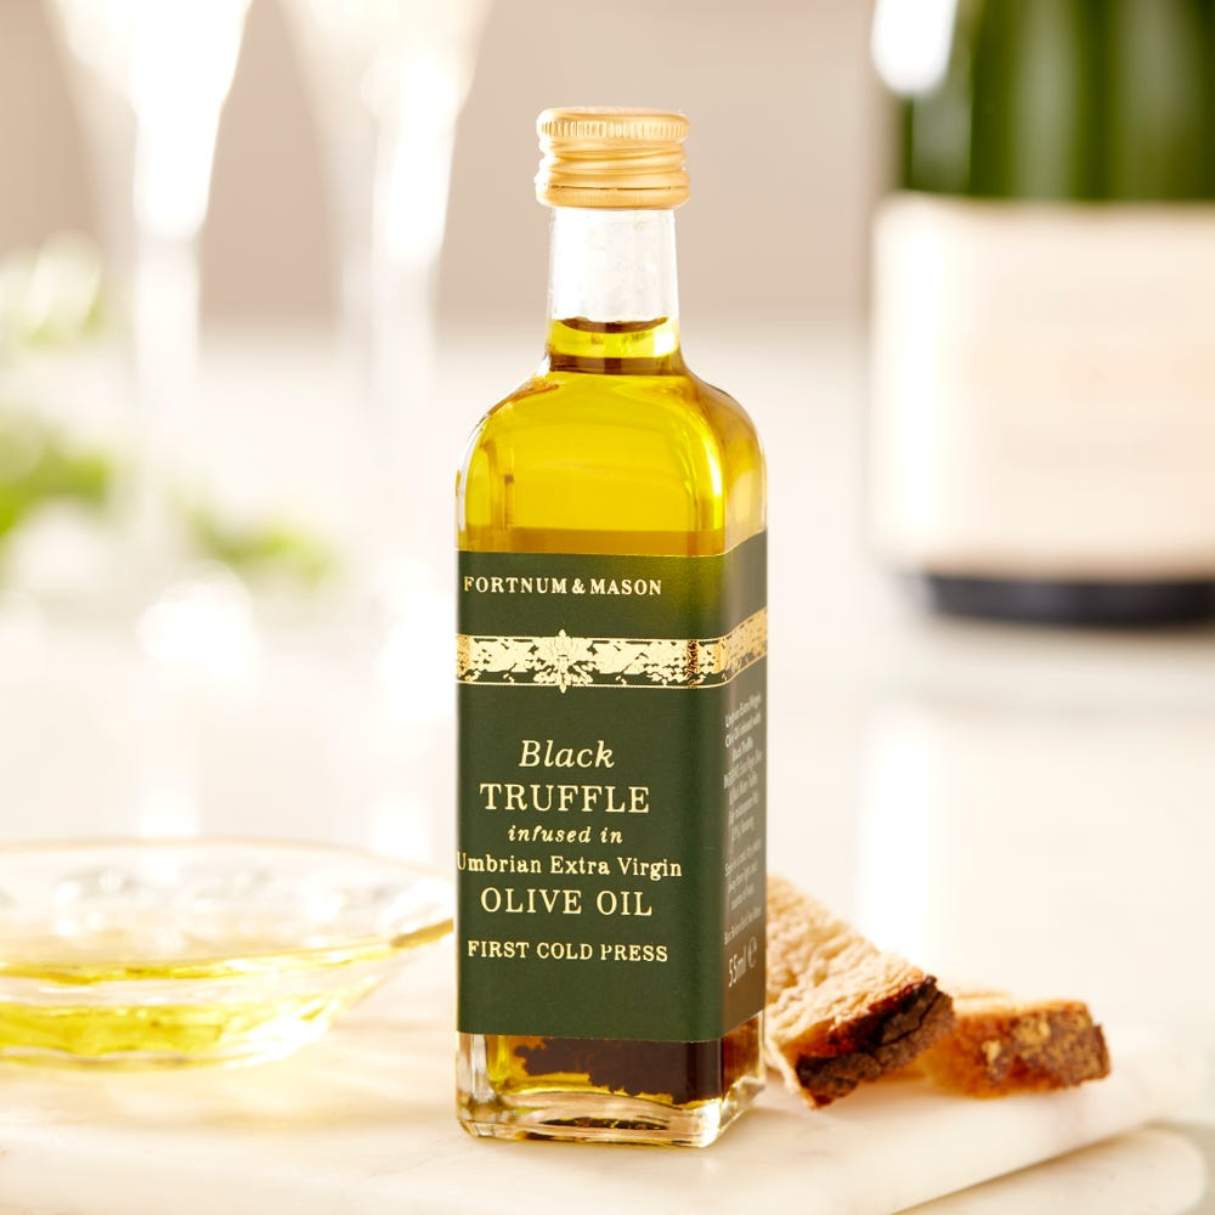 How To Store Truffle Oil